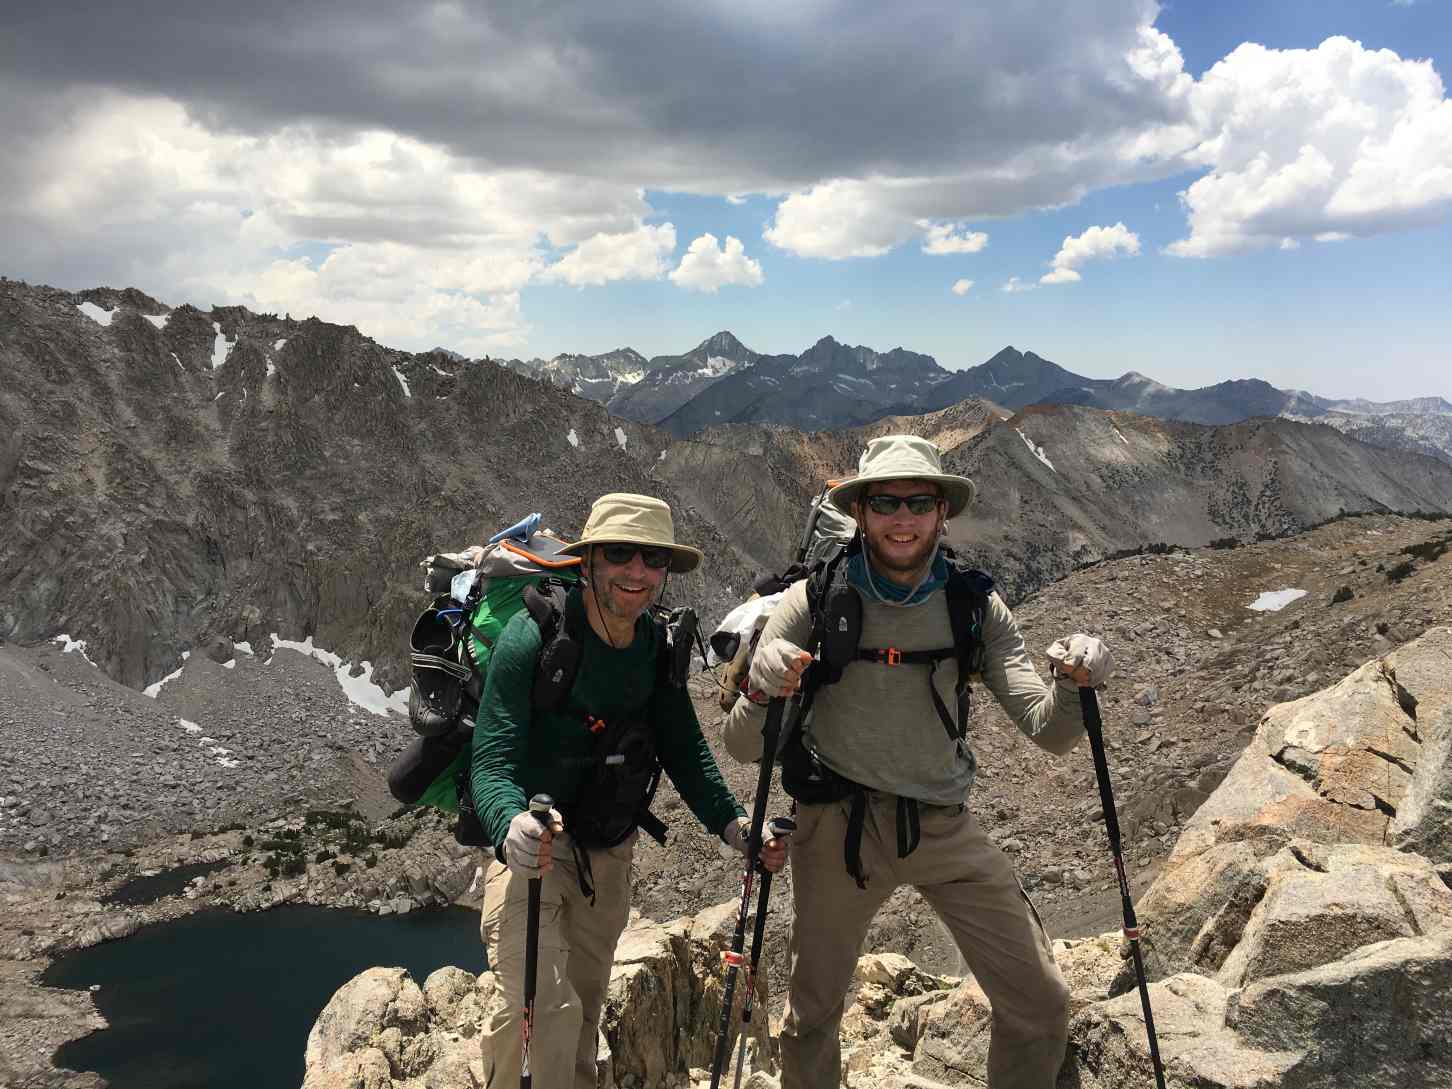 Dr. William Cefalu at the crest of Mt. Whitney